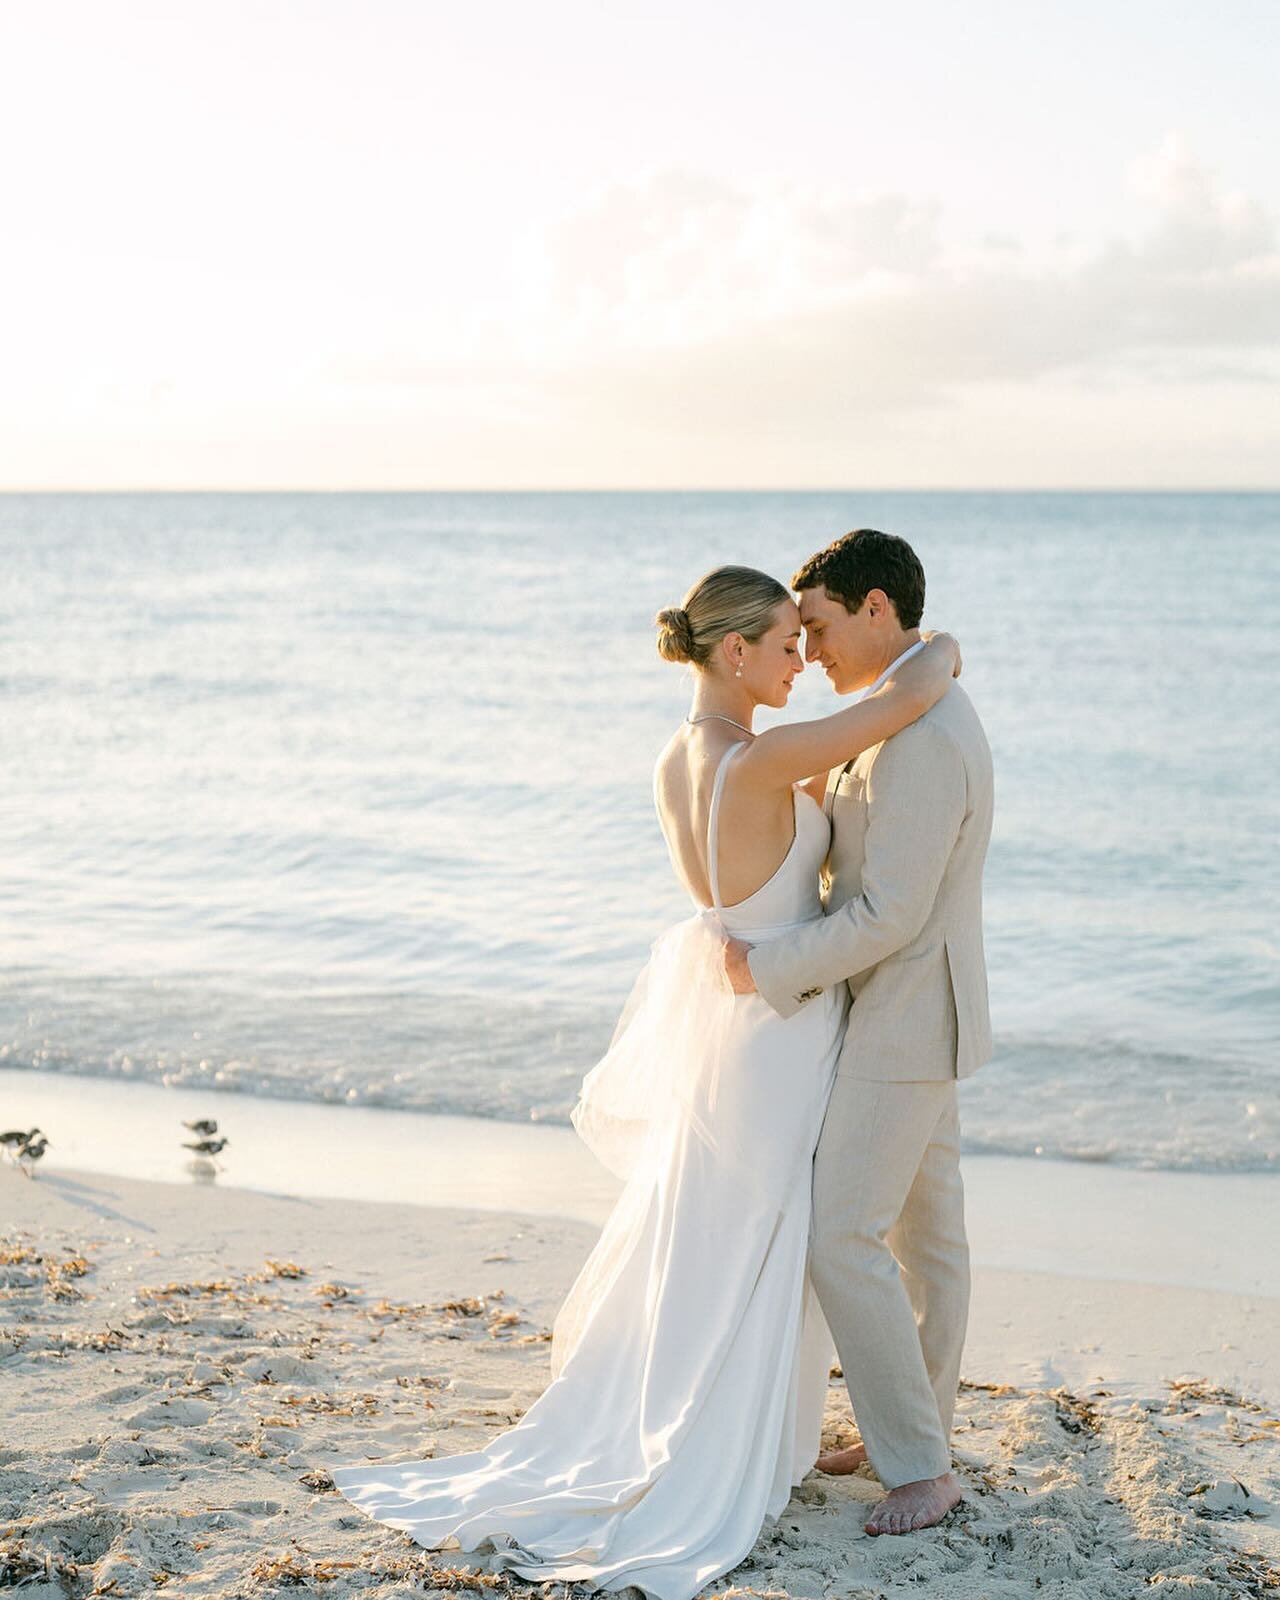 Happy 1st Anniversary to Lauren &amp; Aaron!  Hard to believe a year has passed since the most perfect 3-day weekend in Turks &amp; Caicos celebrating with your friends and family! I truly miss our weekly calls 💕